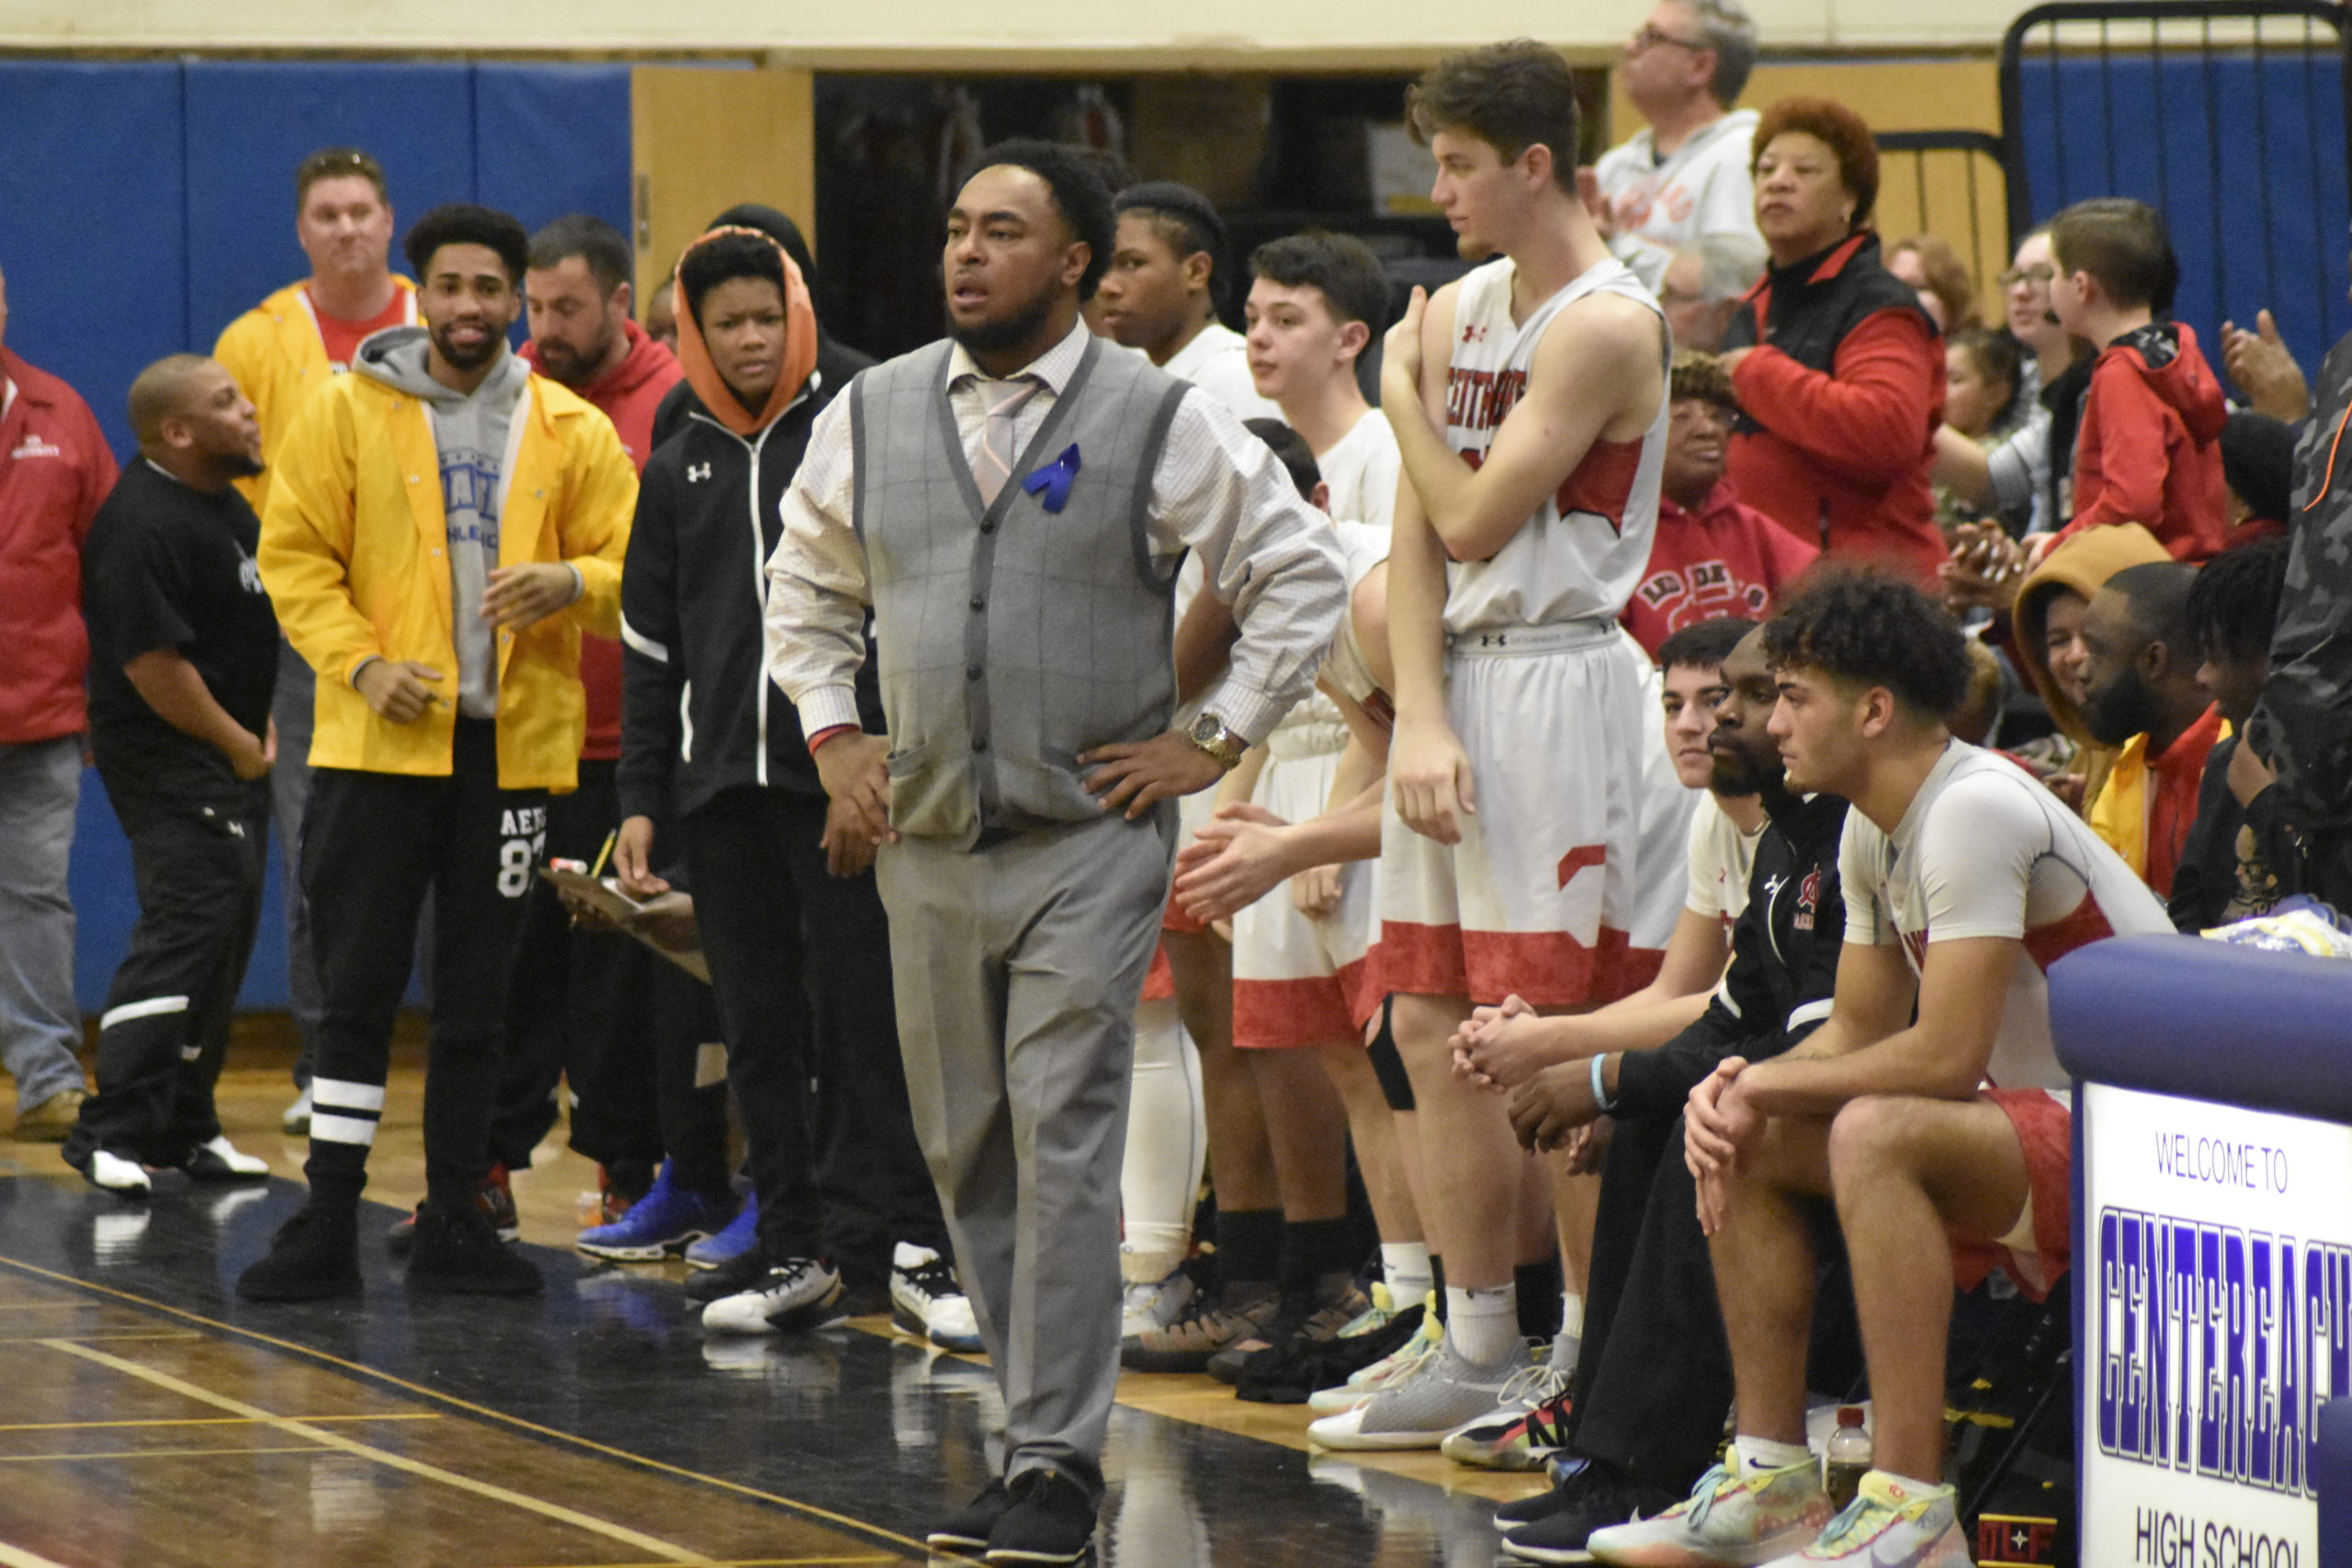 Center Moriches head coach Nick Thomas with his players behind ready to celebrate their fourth consecutive county title.